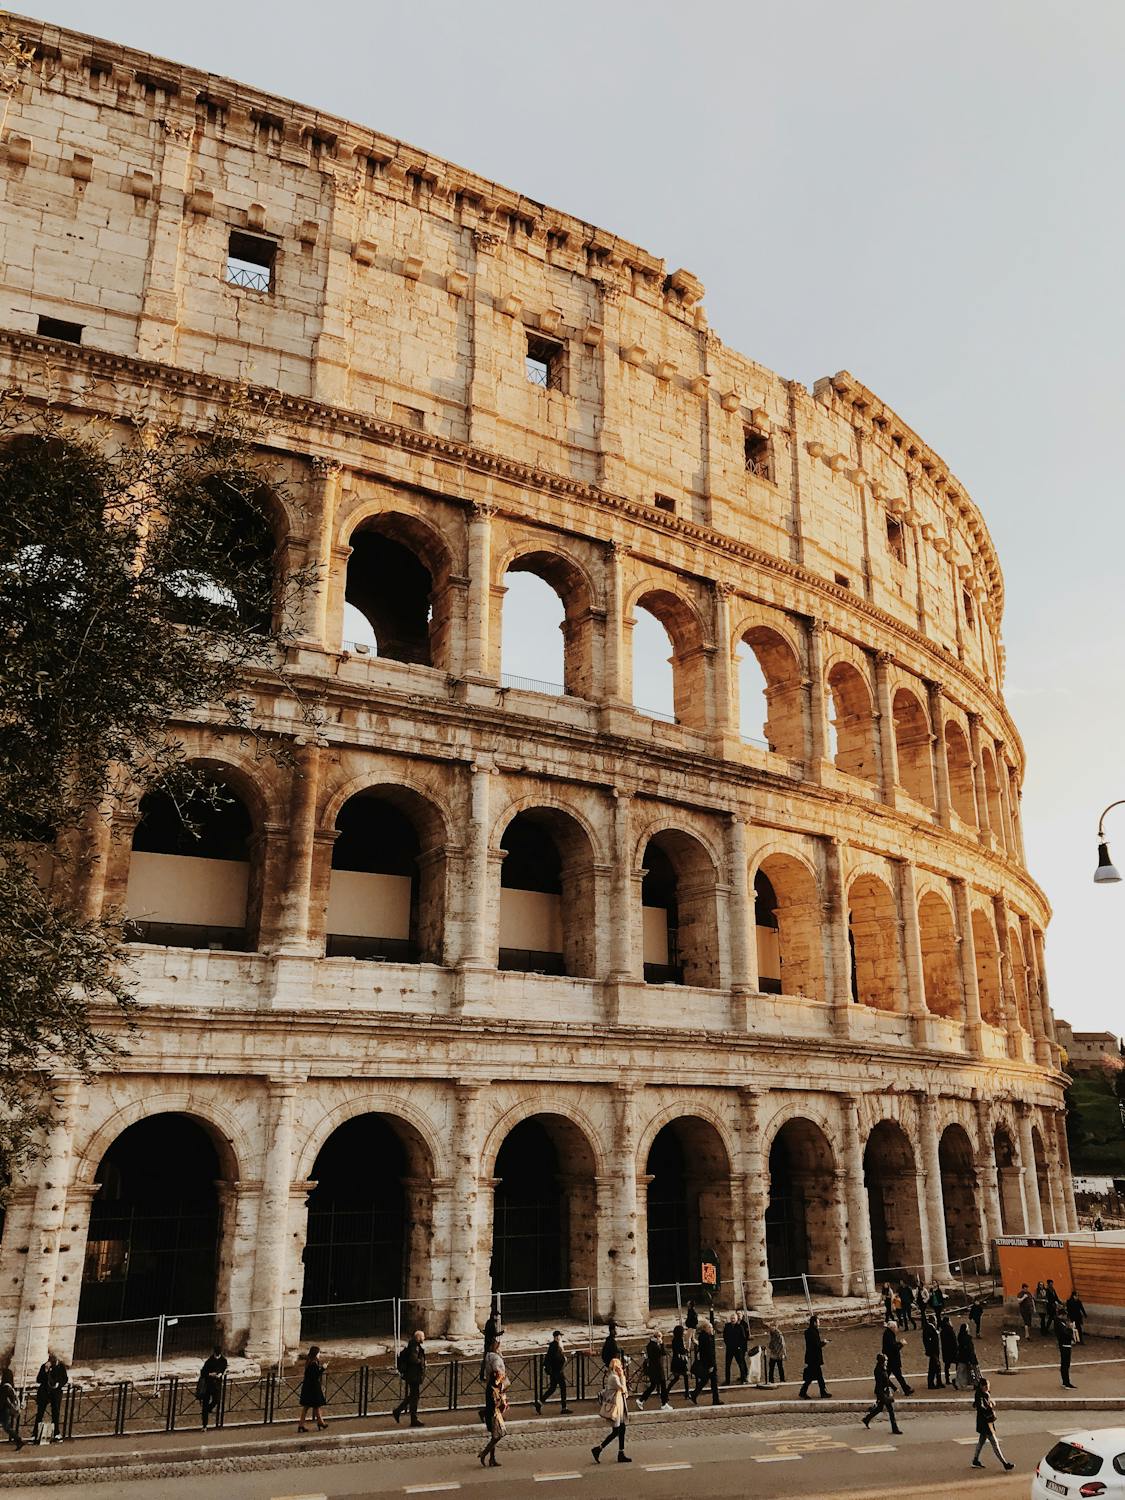 Attractions in Rome, Italy